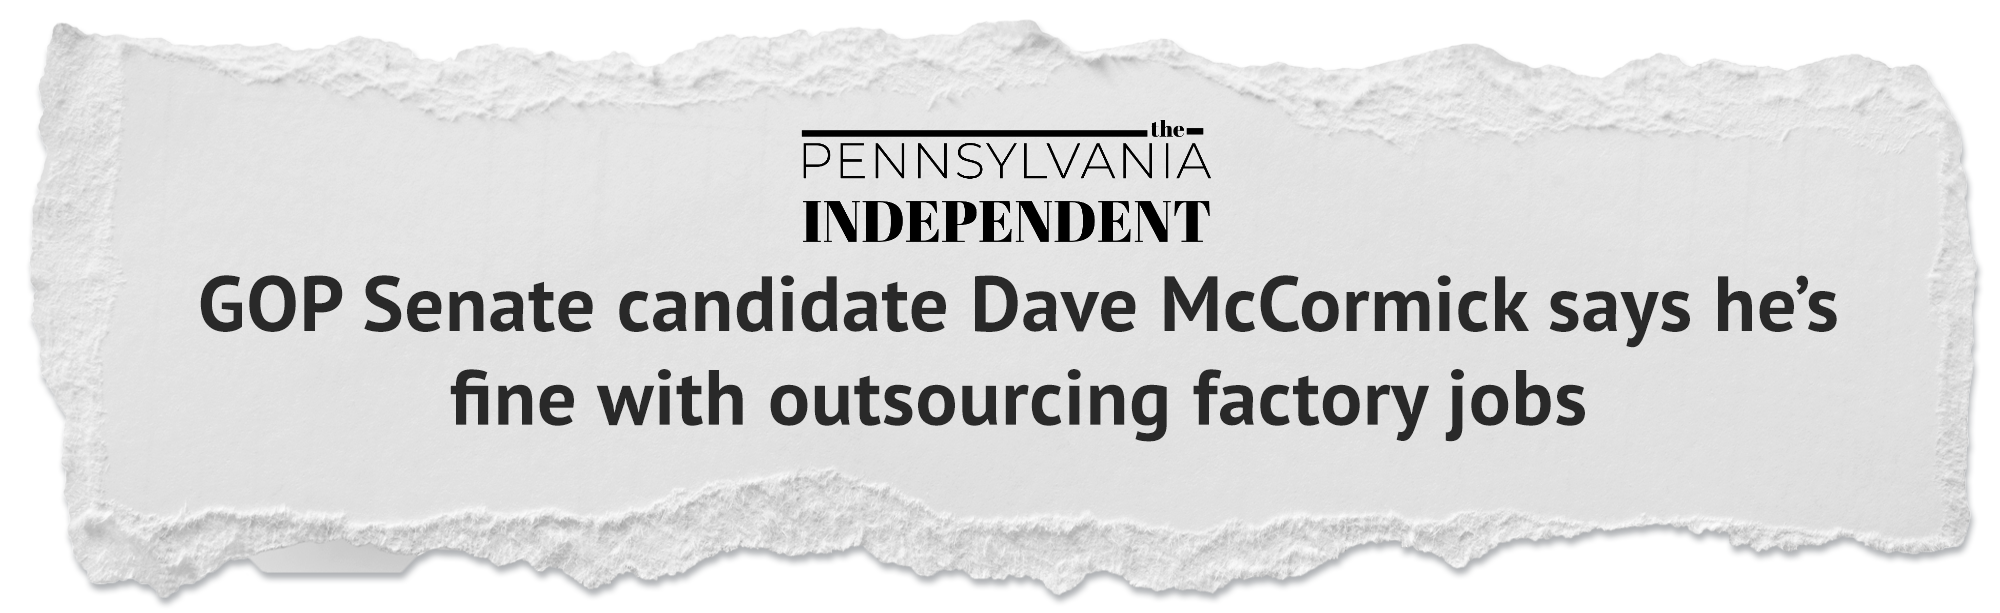 https://pennsylvaniaindependent.com/gop-senate-candidate-dave-mccormick-outsourcing-factory-jobs-workers-2024-election/